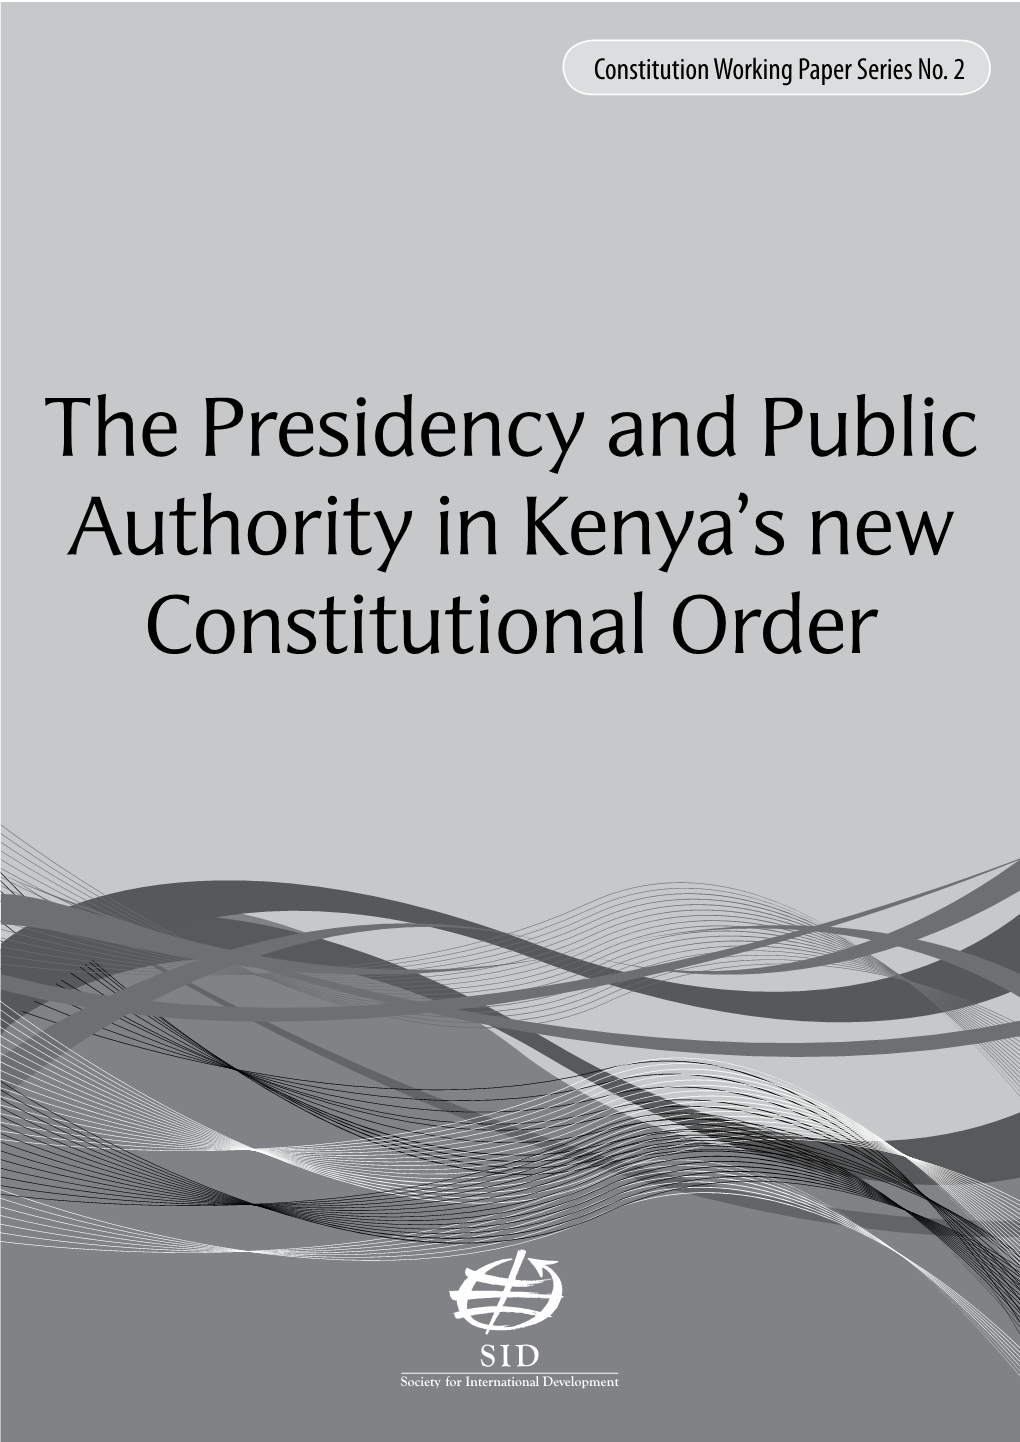 The Presidency and Public Authority in Kenya's New Constitutional Order